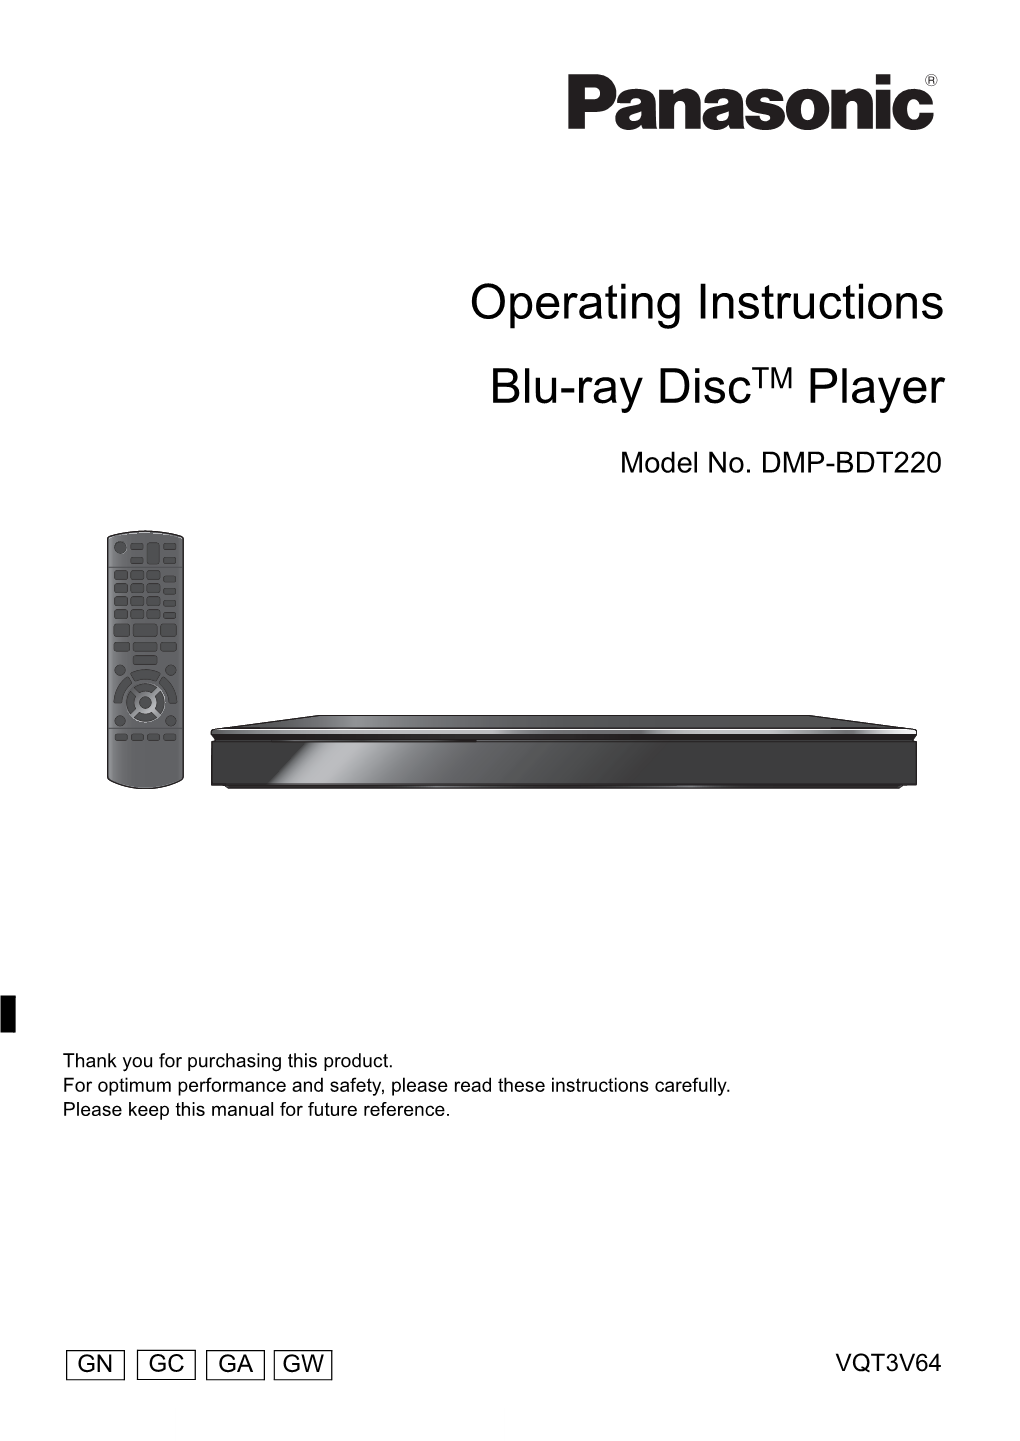 Operating Instructions Blu-Ray Disctm Player